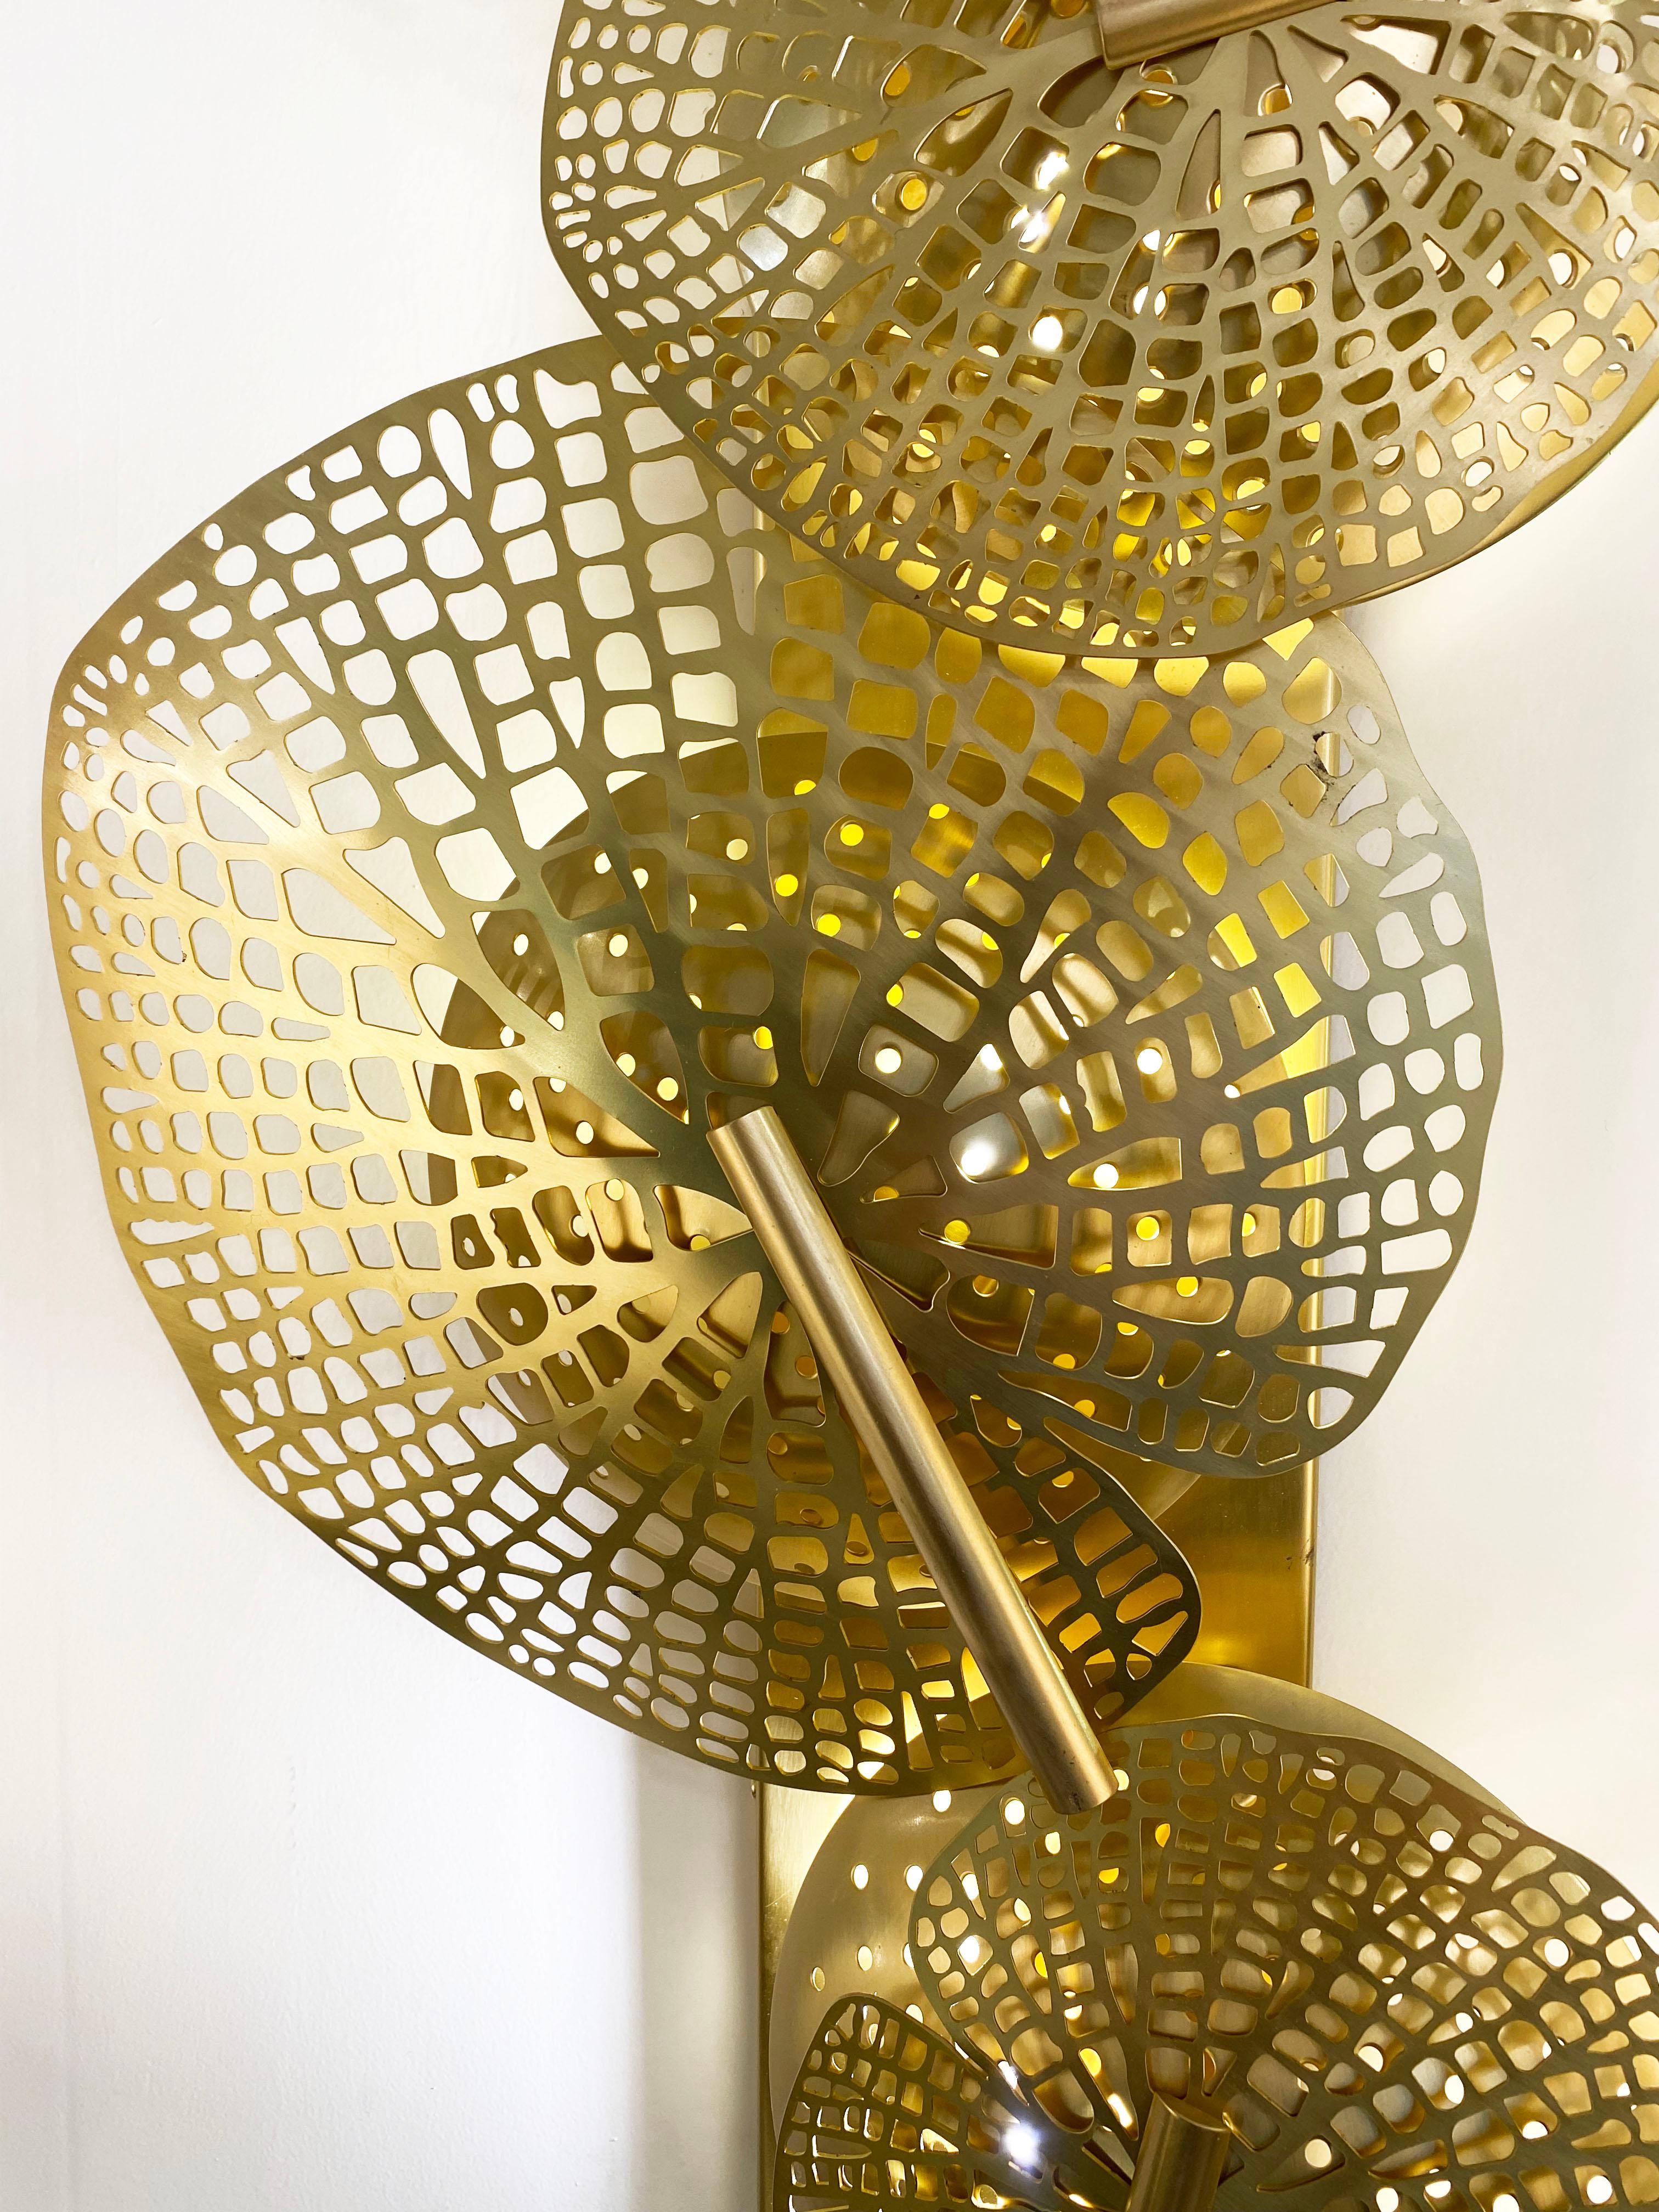 Contemporary Bespoke Organic Italian Art Design Perforated Brass Leaf Wall Light In New Condition For Sale In New York, NY